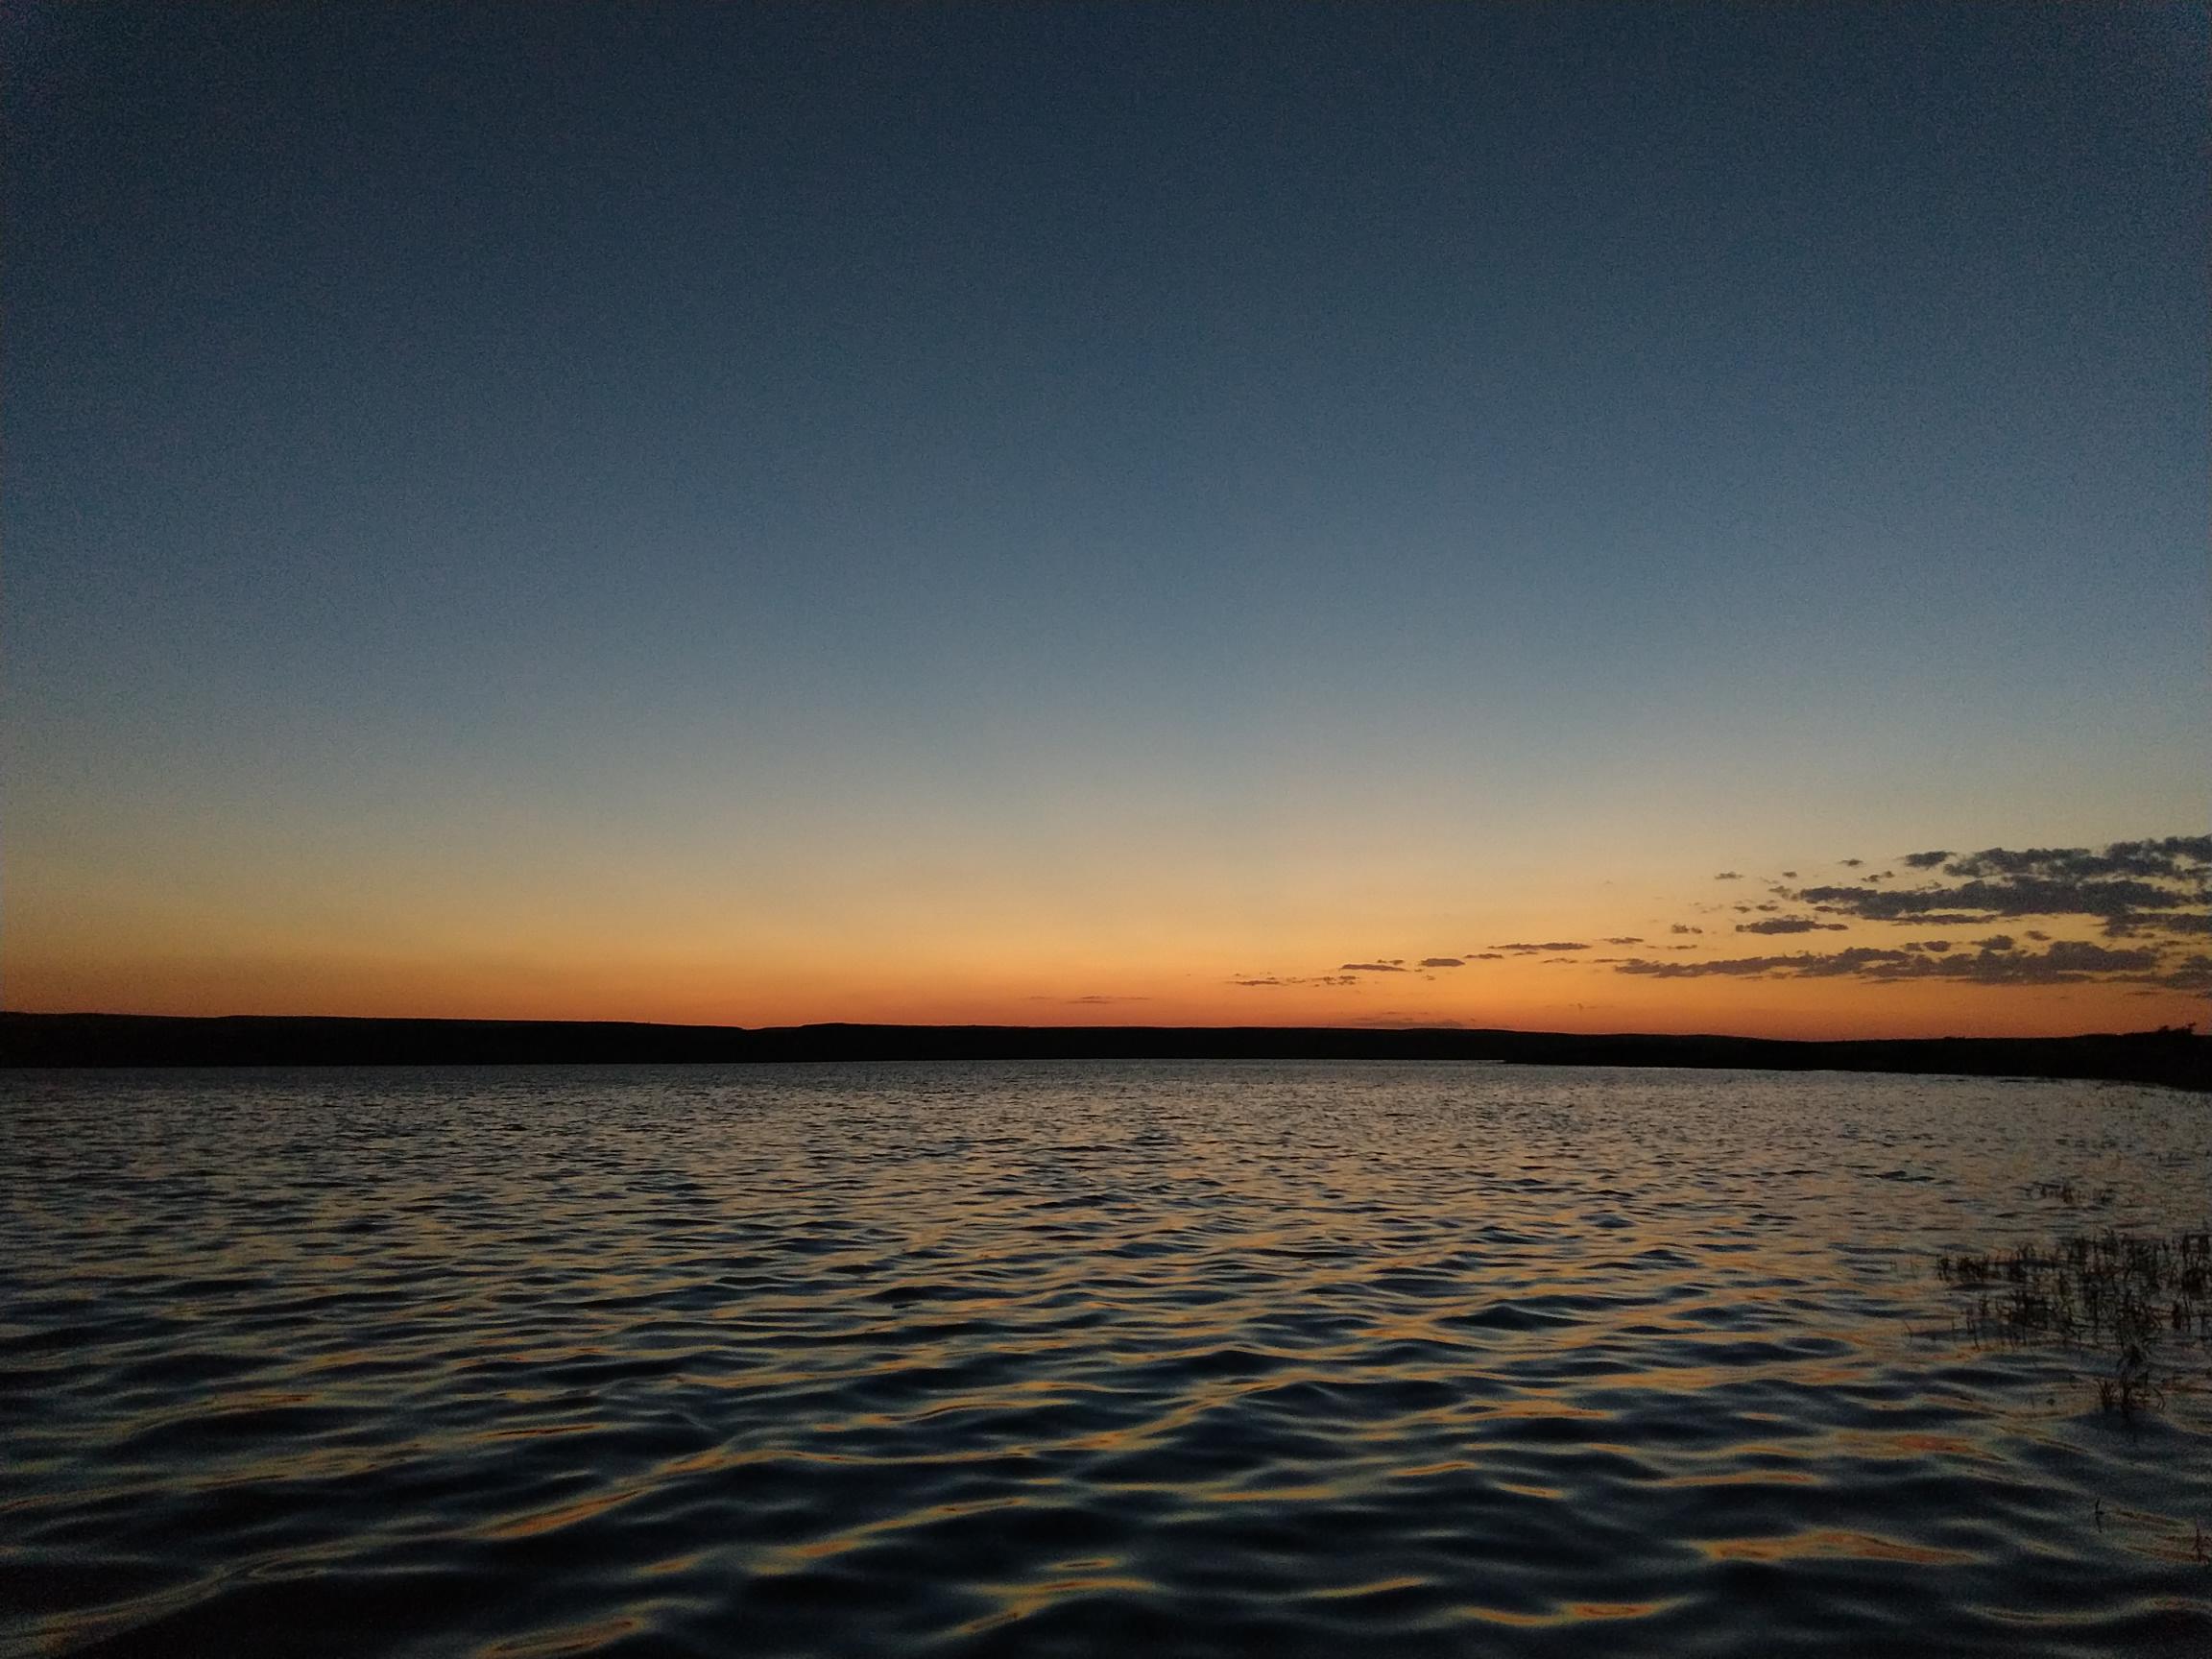 Lake Diefenbaker, shortly after sunset.